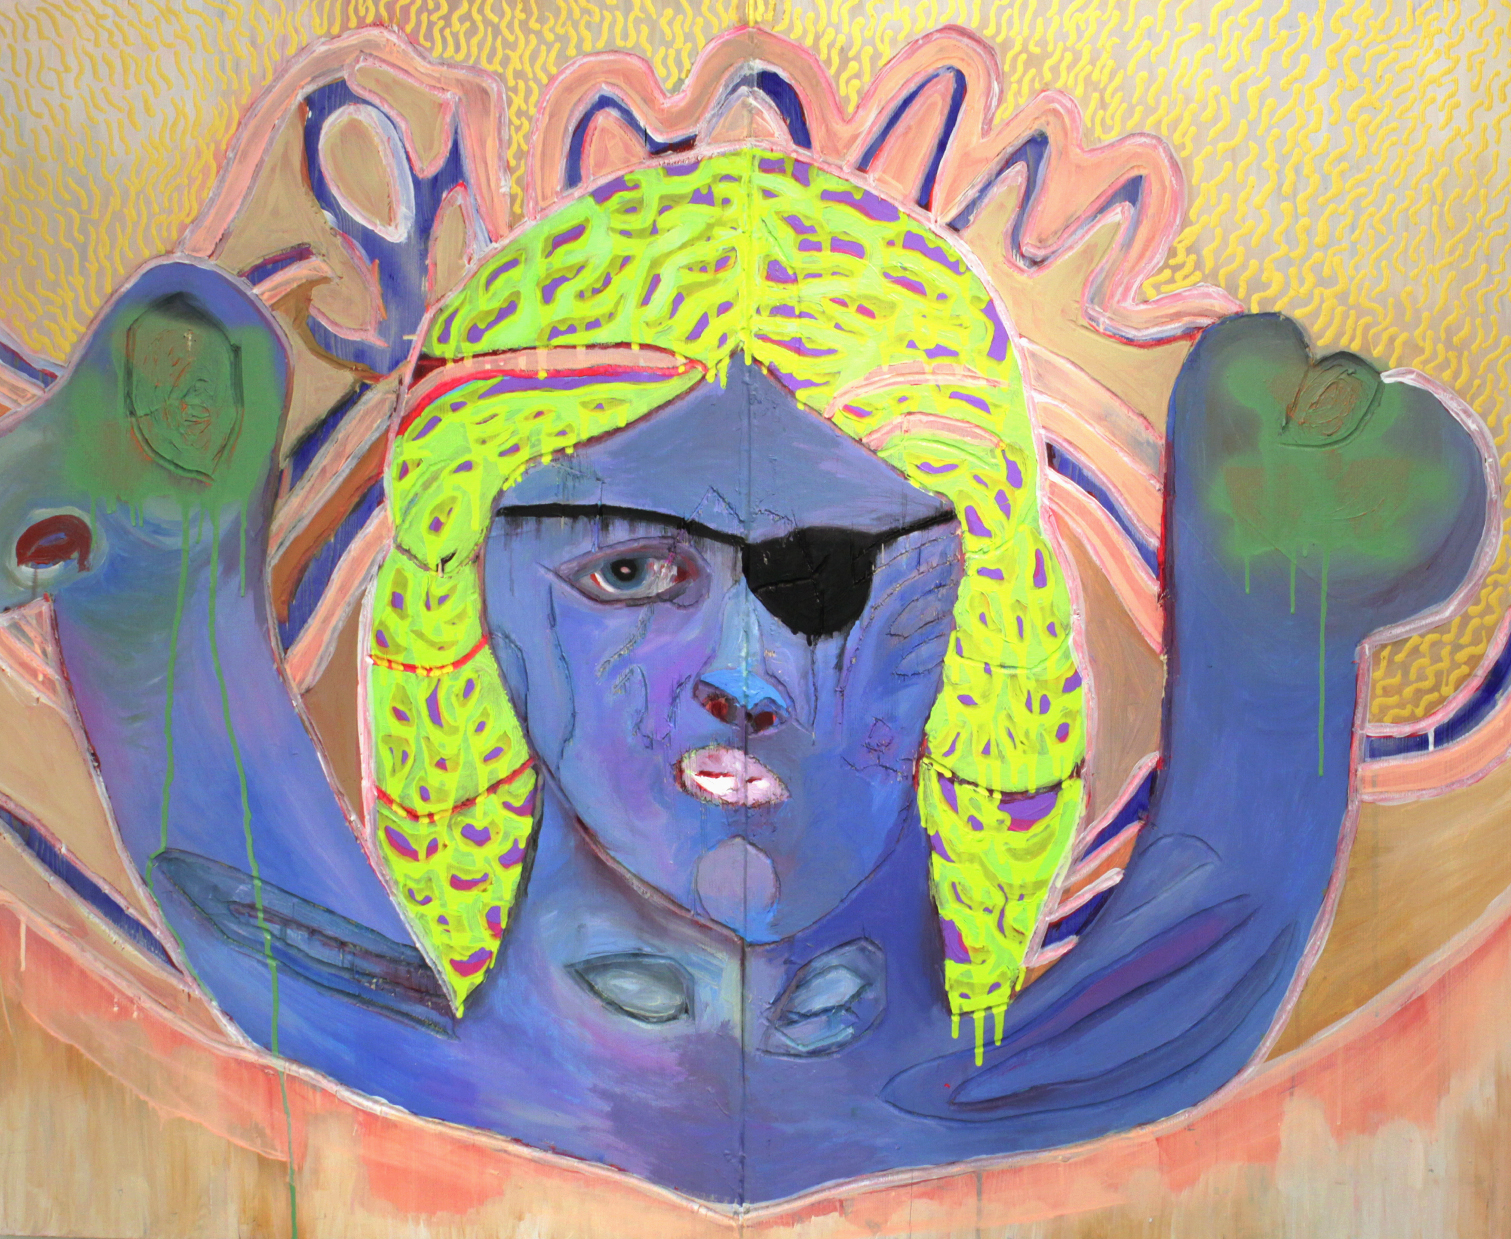 Camilla Vuorenmaa Medusa, 2018 painting and carving on wood 95 x 118 cm